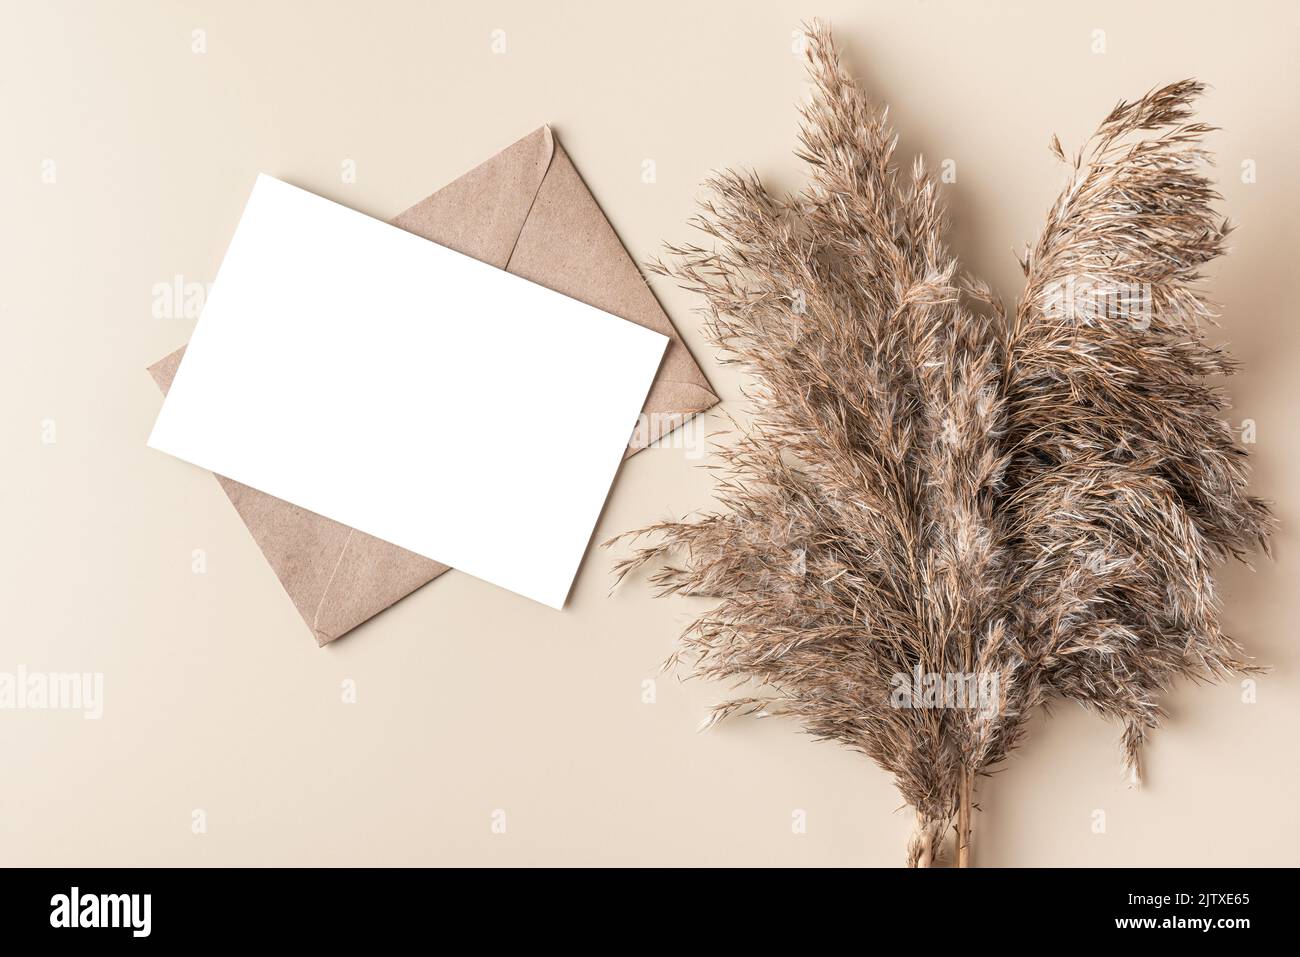 Blank greeting card with dry cane reeds or pampas grass on beige background. Flat lay. Mock up. Autumn background. Top view Stock Photo